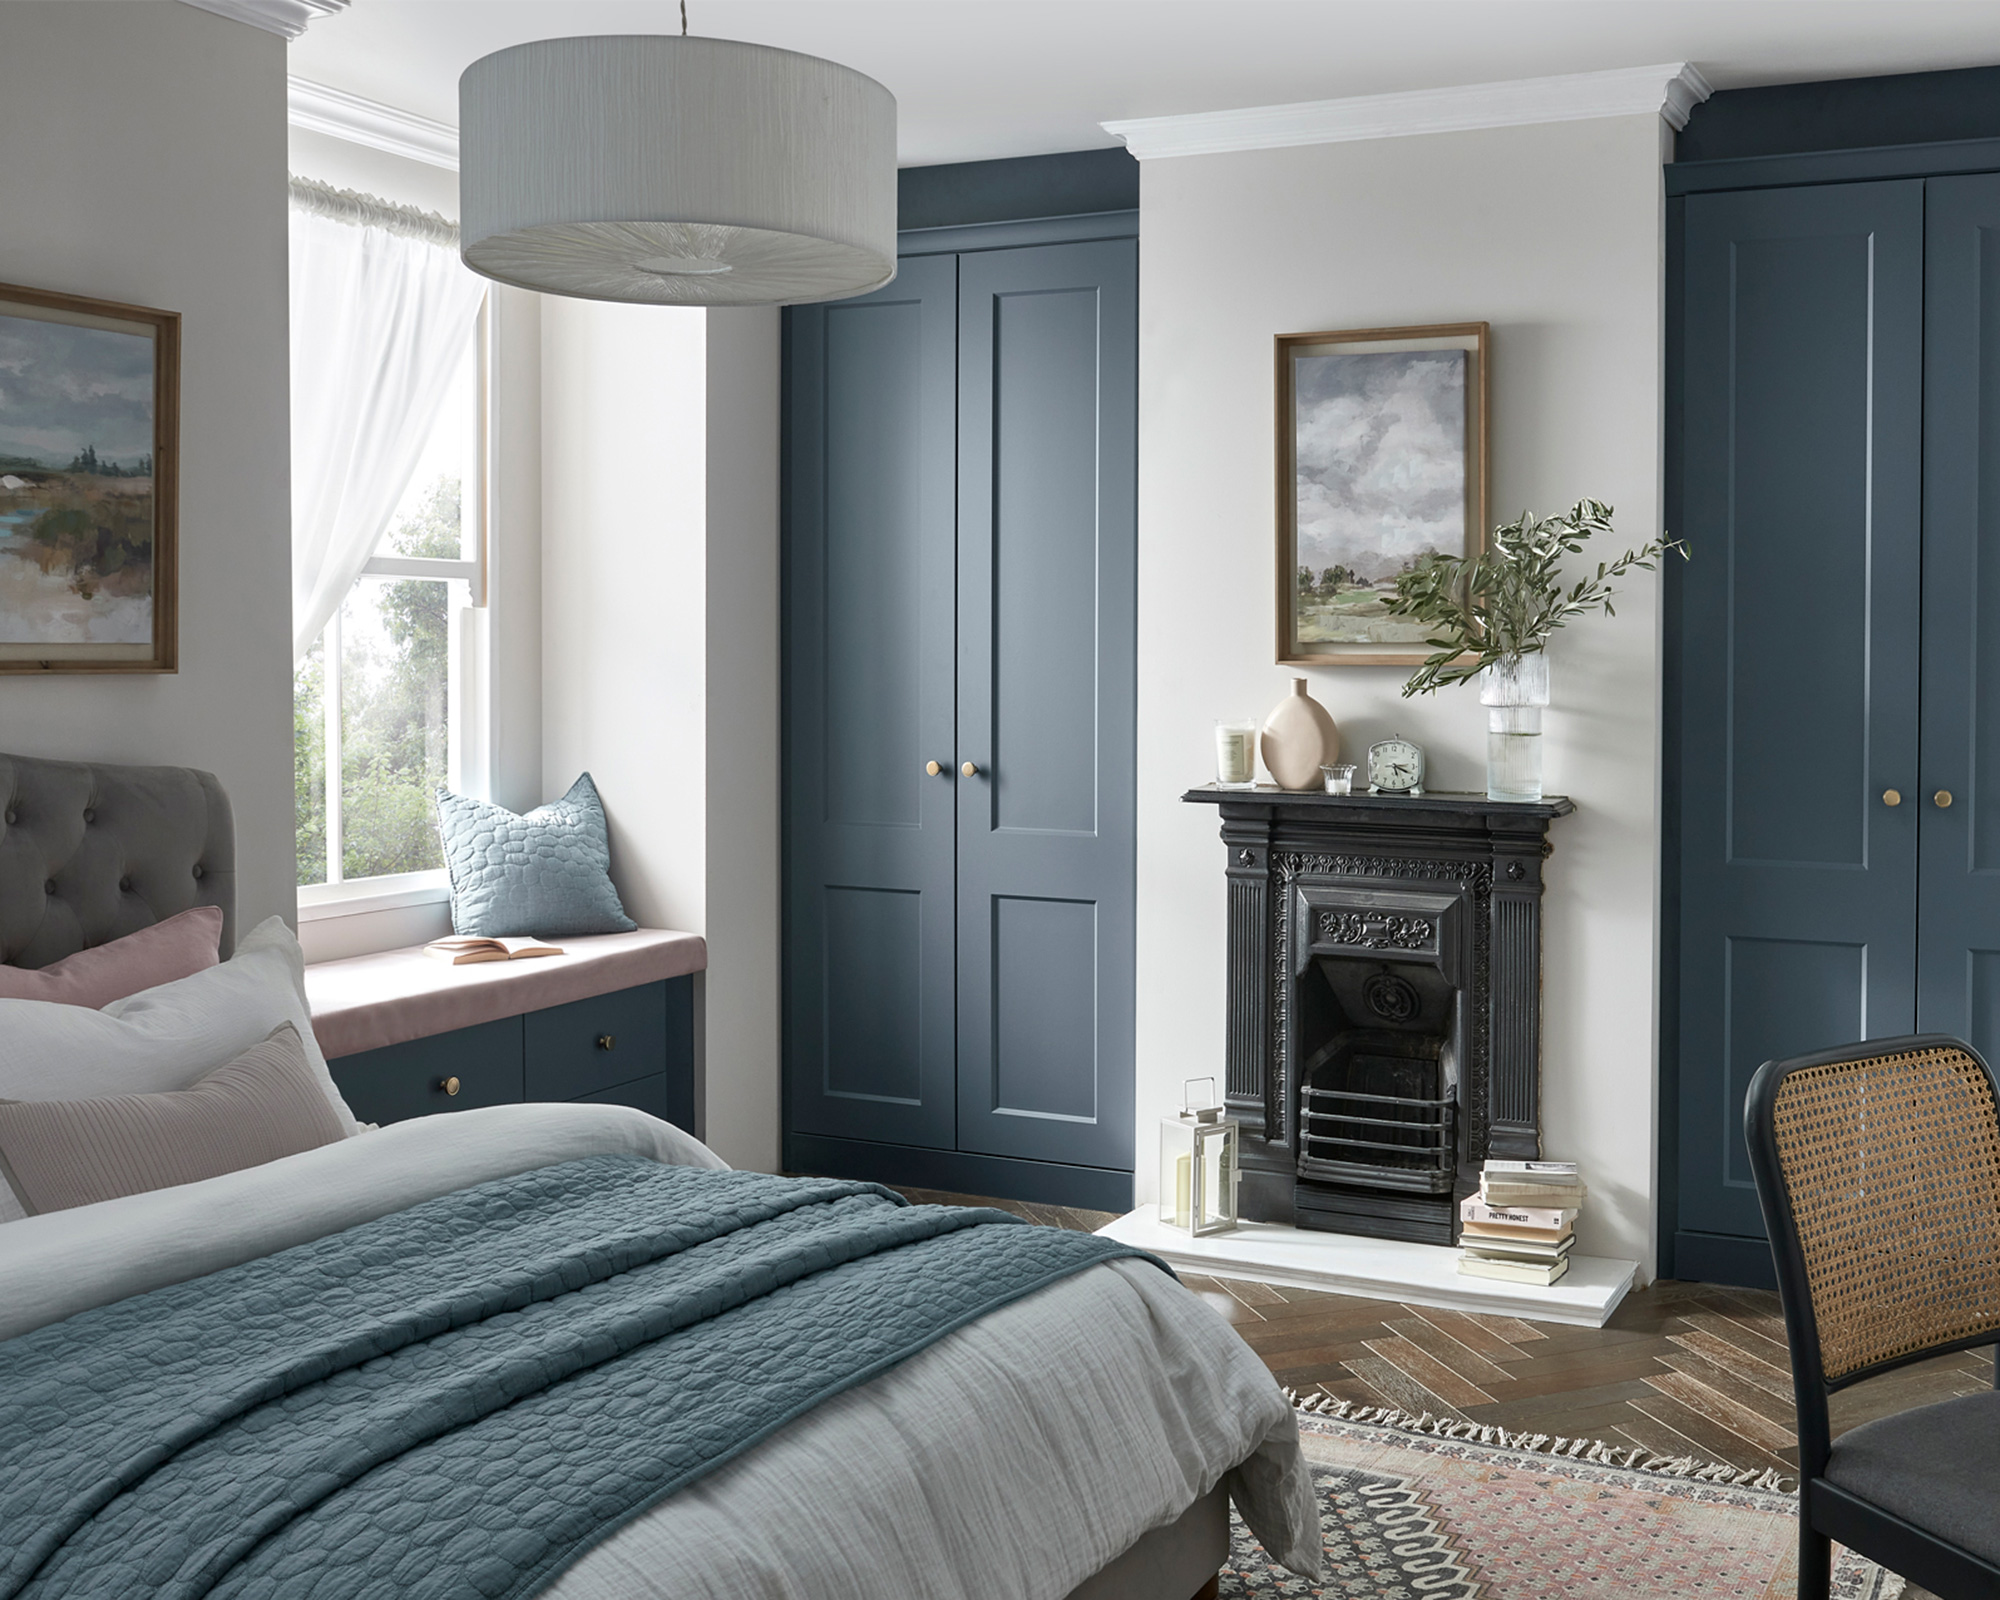 A blue bedroom with fitted wardrobes, double bed and window seat